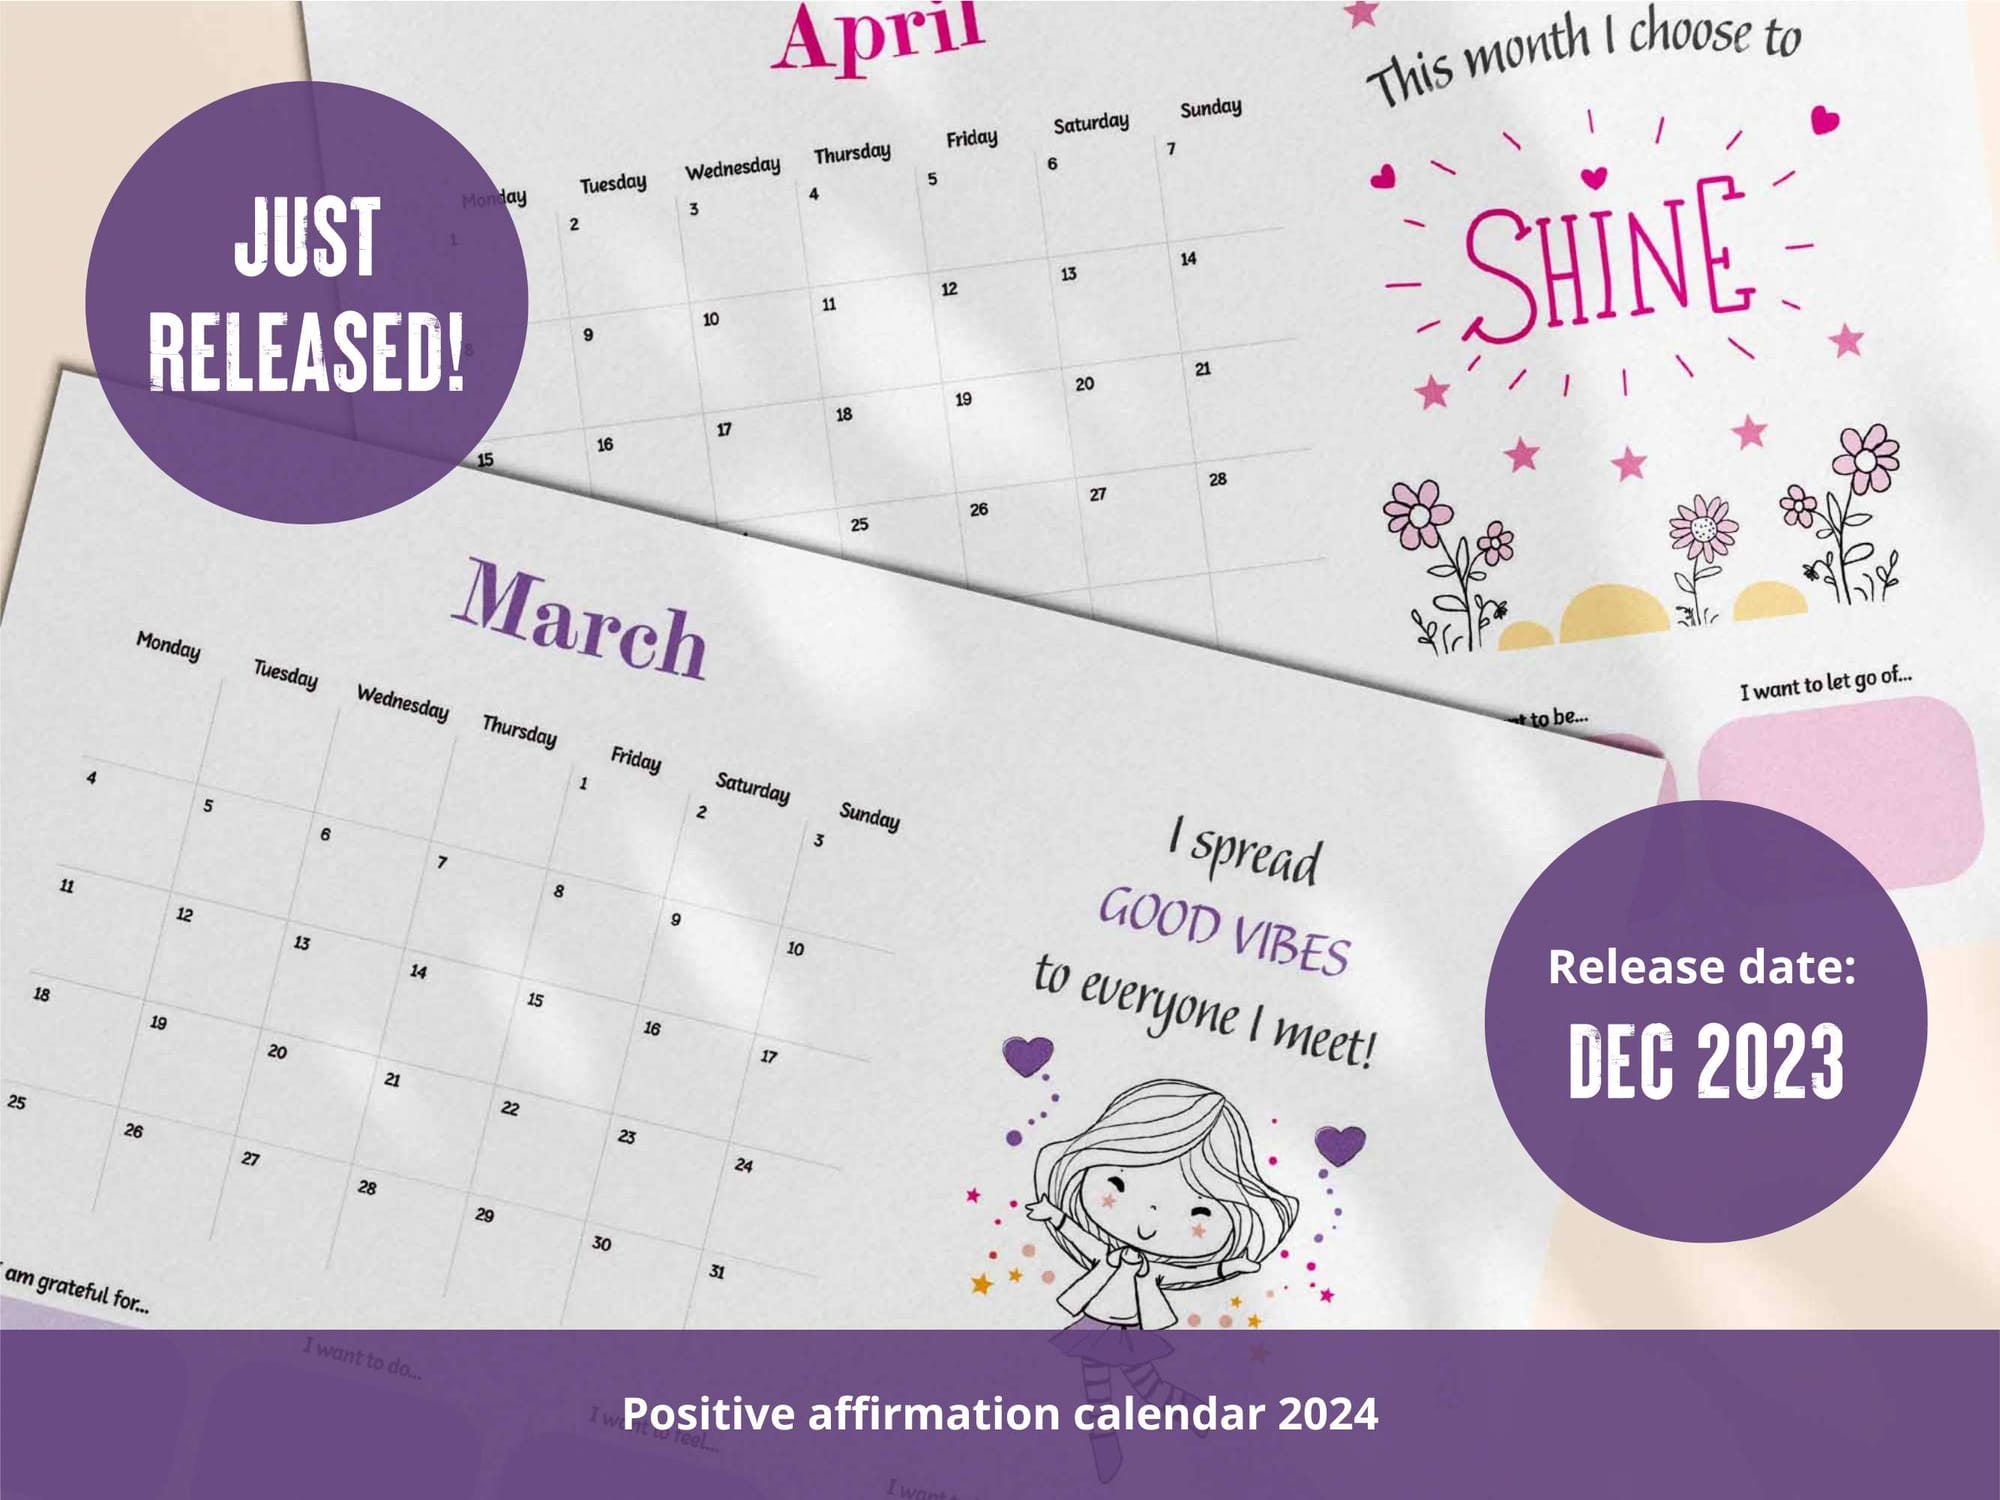 Just released - printable positive affirmation monthly calendar 2024.